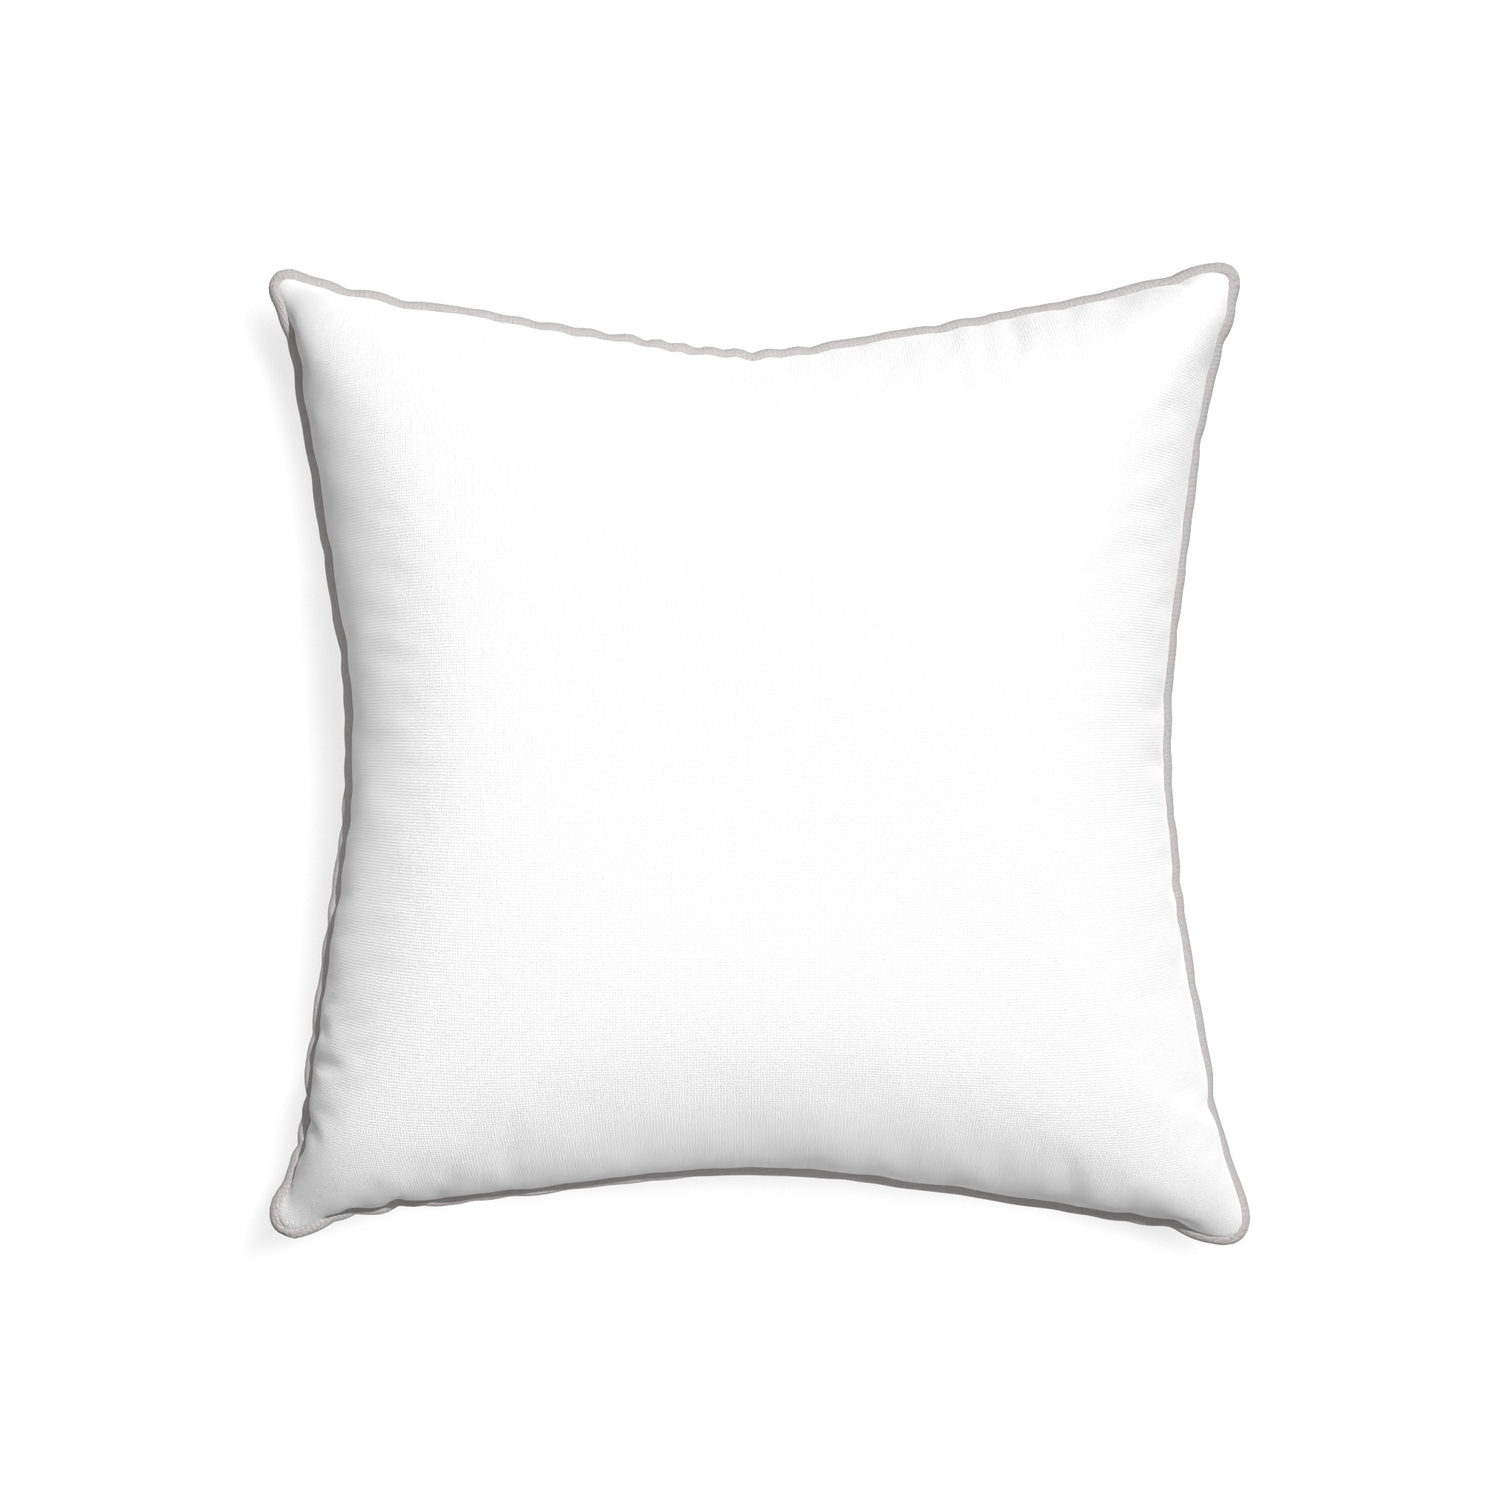 22-square snow custom pillow with pebble piping on white background